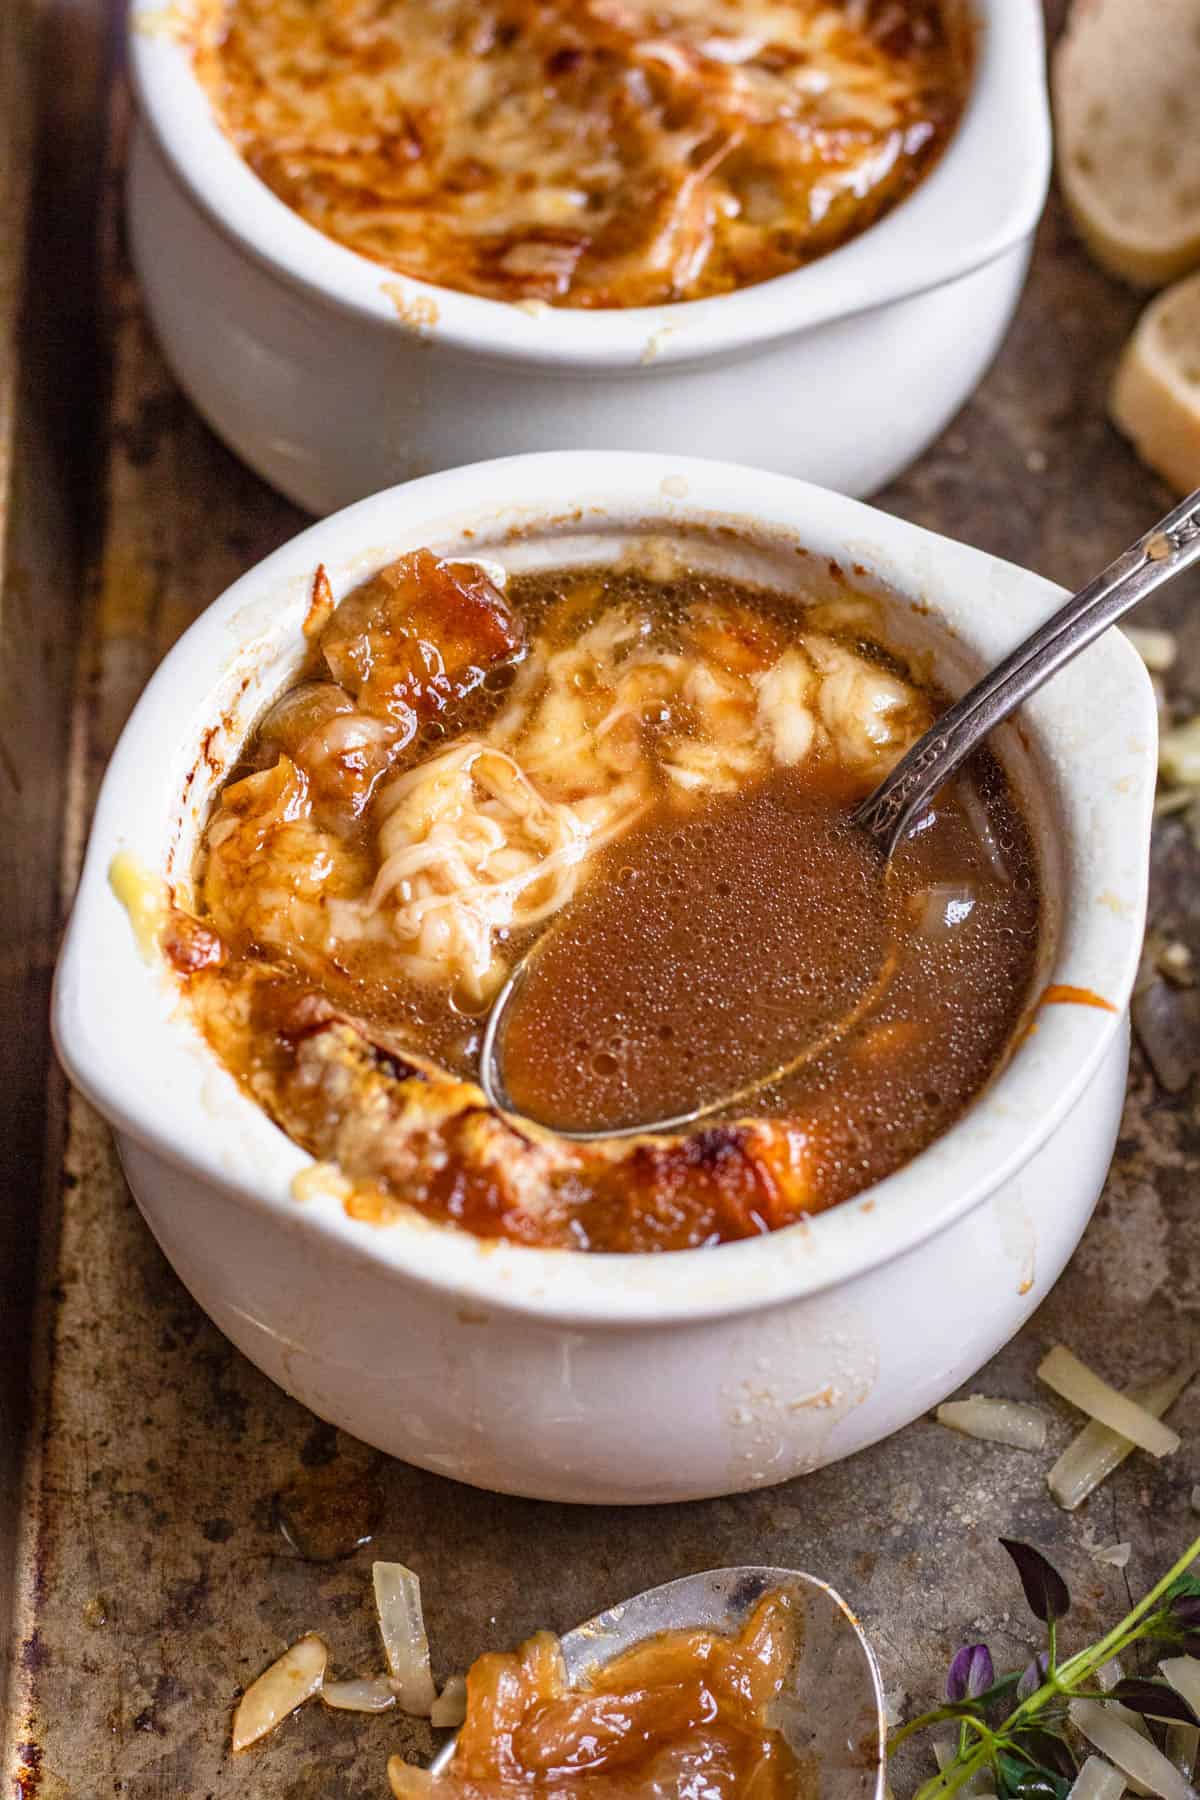 Spoonful of french onion soup being lifted out of a bowl of melted cheese.